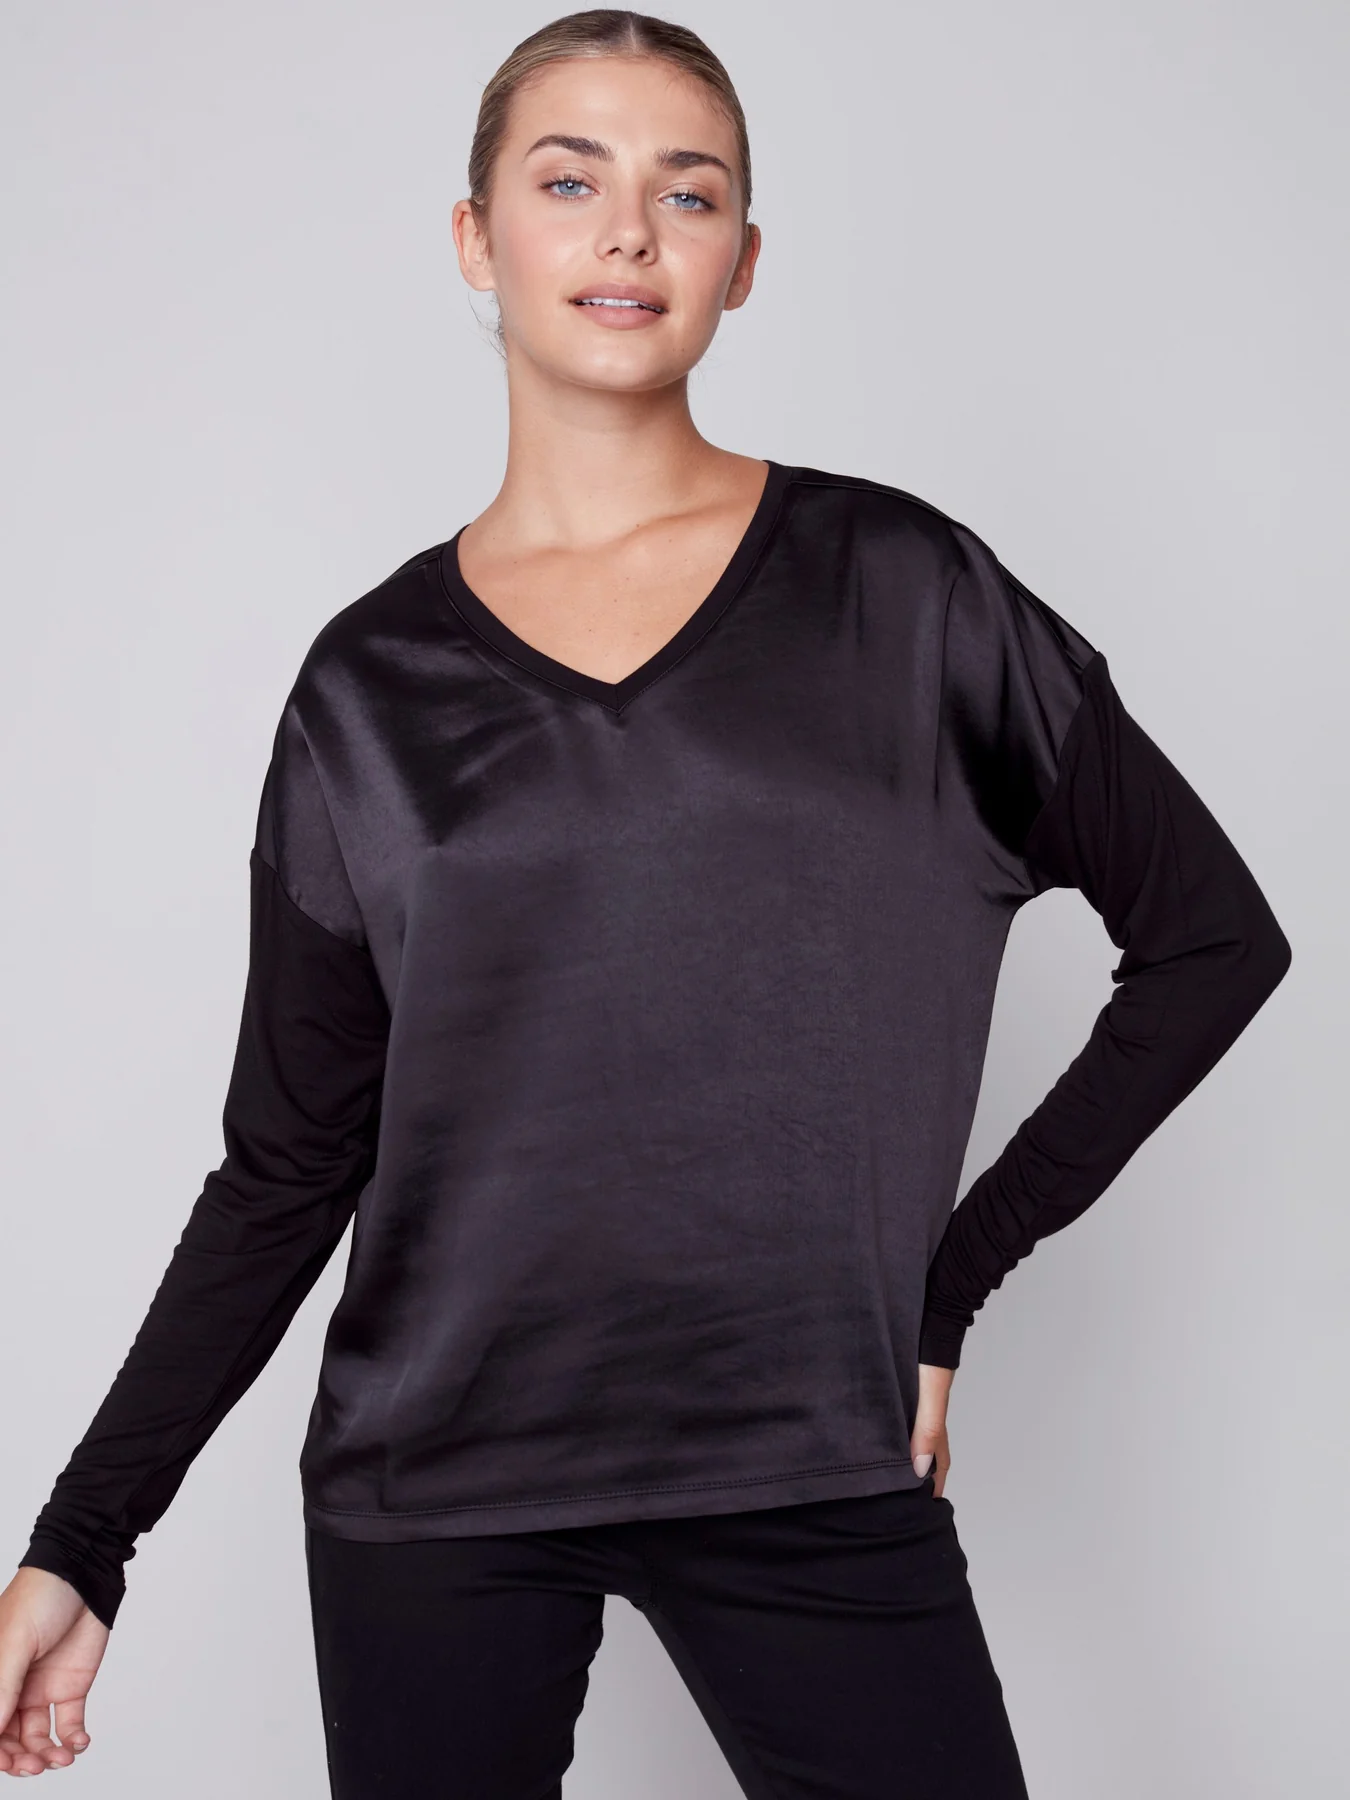 Charlie B - Satin and Jersey Knit Top ~ Black